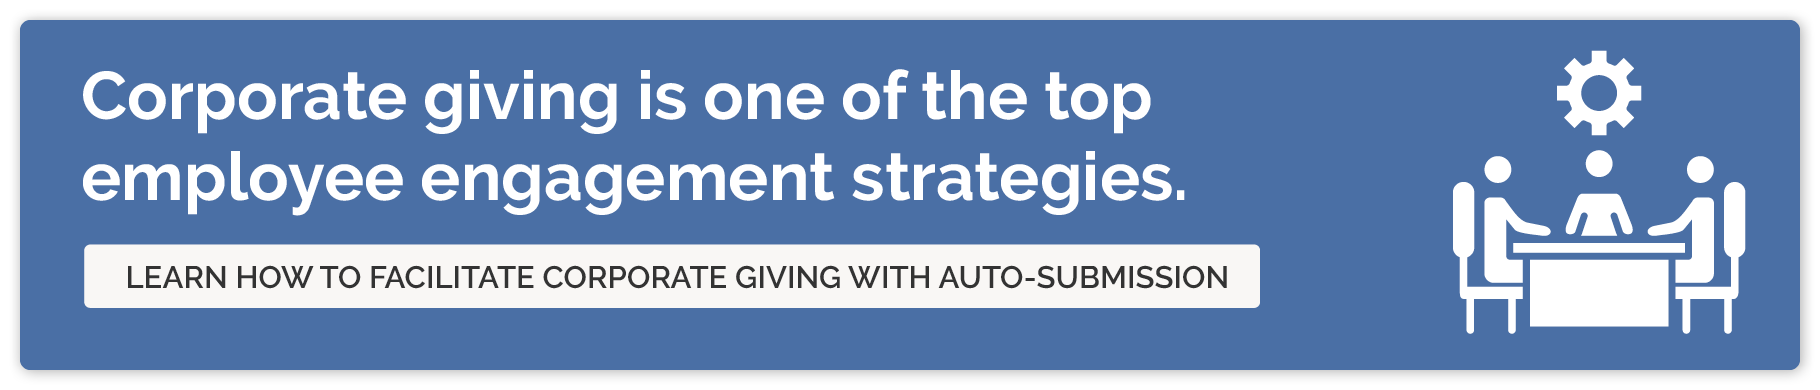 Learn how to implement one of the top employee engagement strategies with auto-submission.